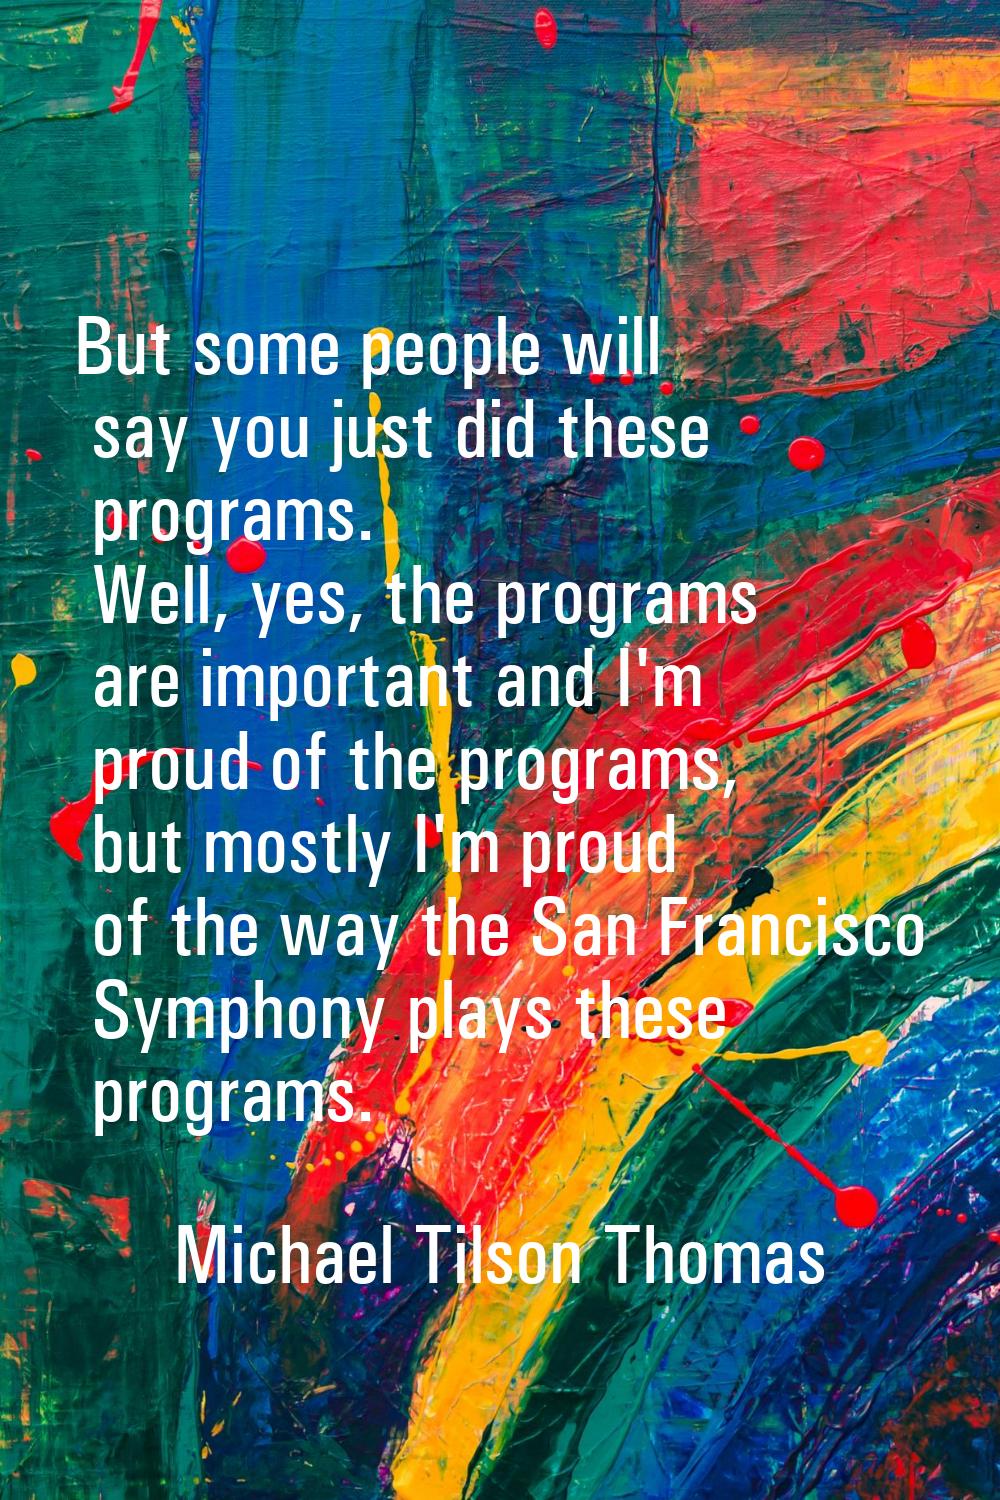 But some people will say you just did these programs. Well, yes, the programs are important and I'm